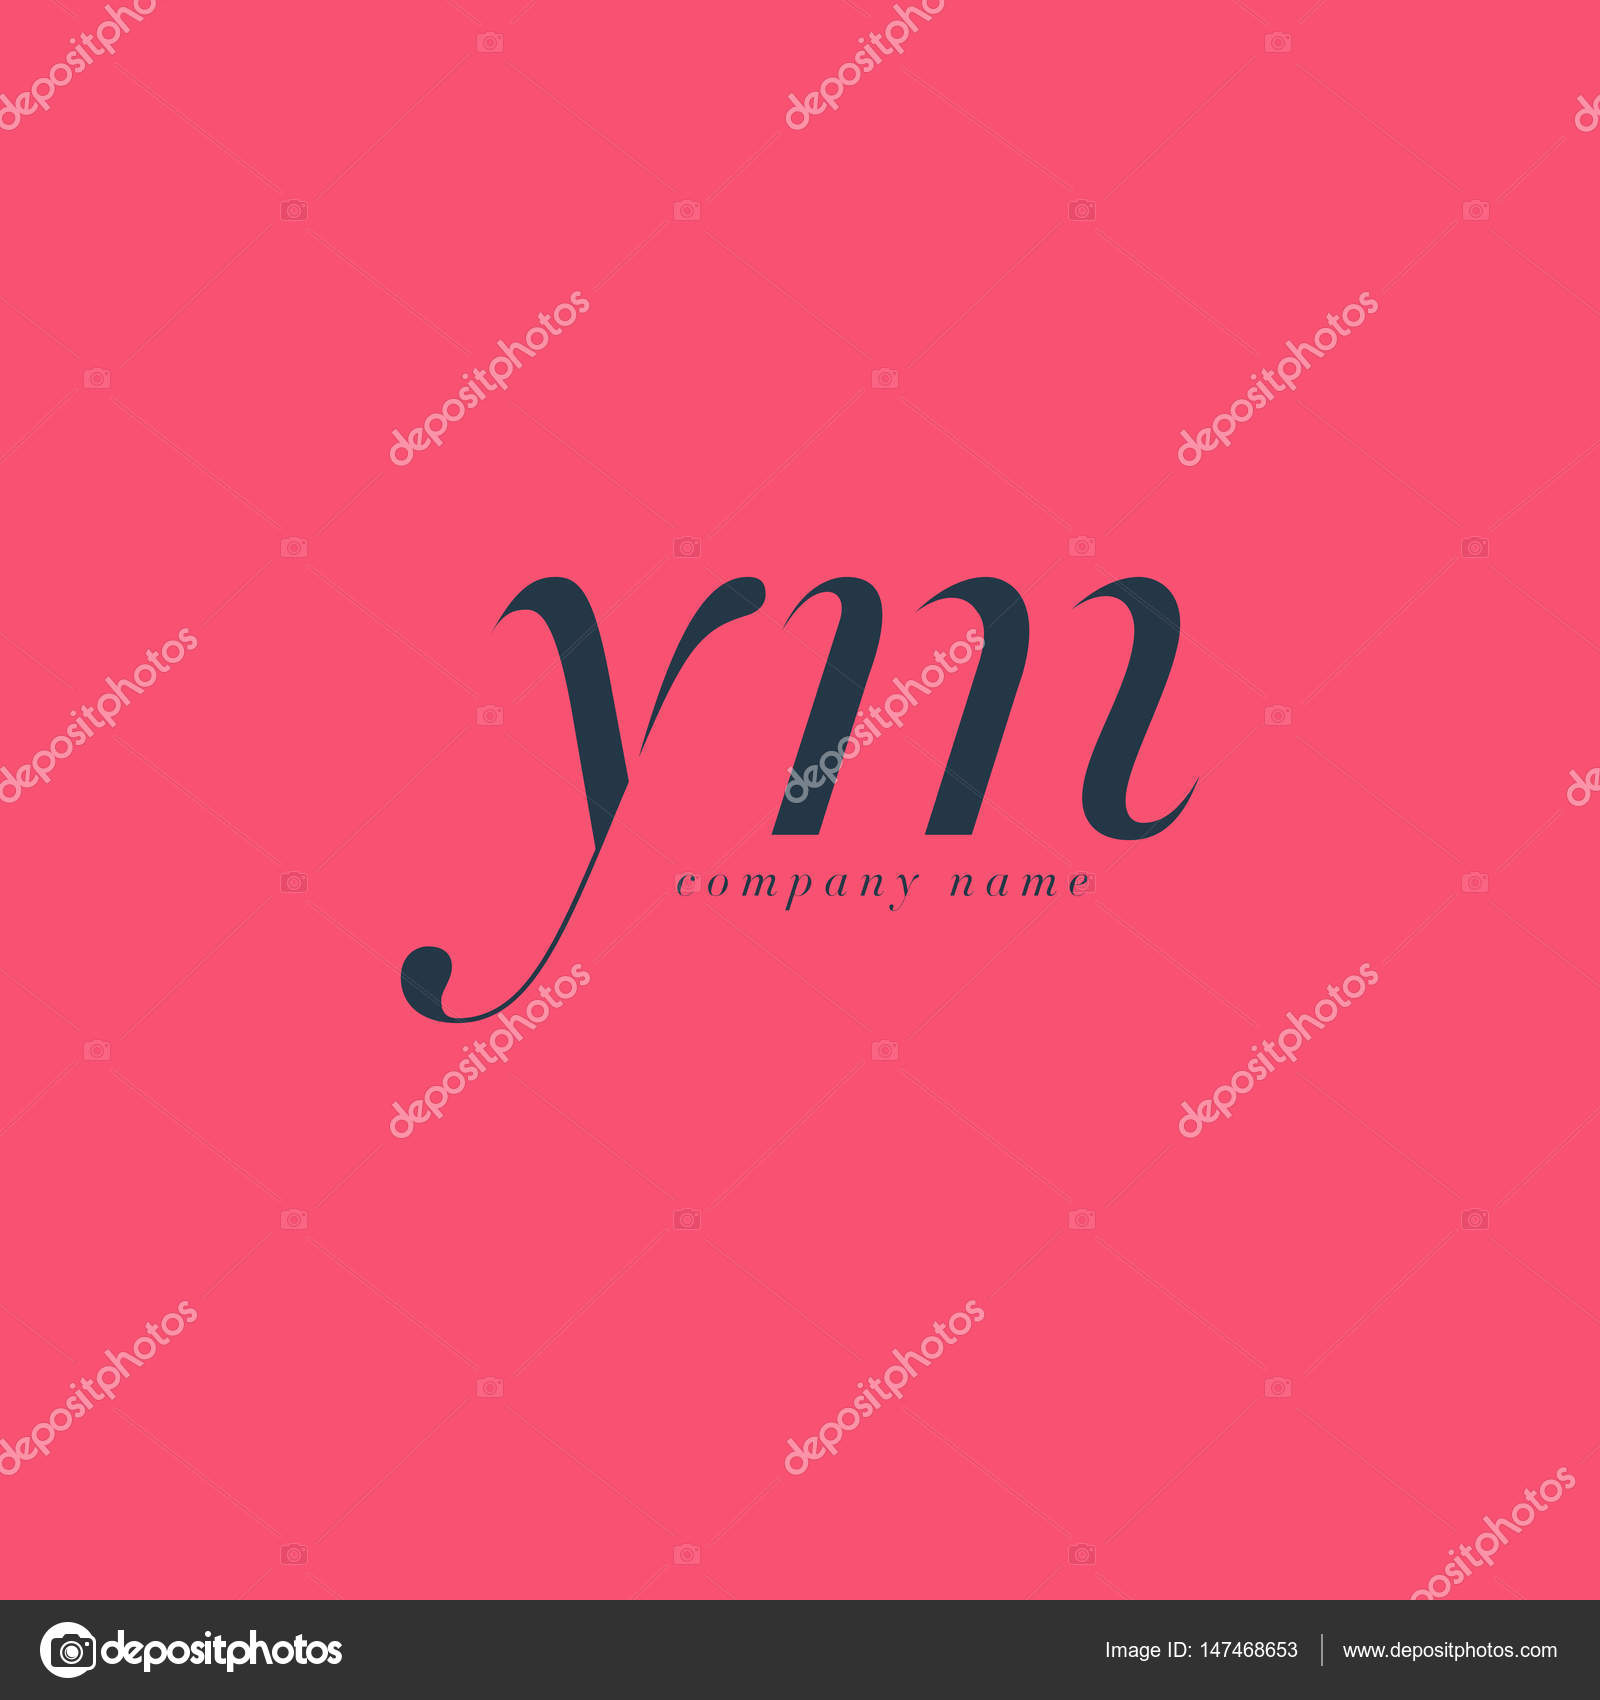 ᐈ Ym Letter Logo Stock Images Royalty Free Letters Ym Vectors Download On Depositphotos